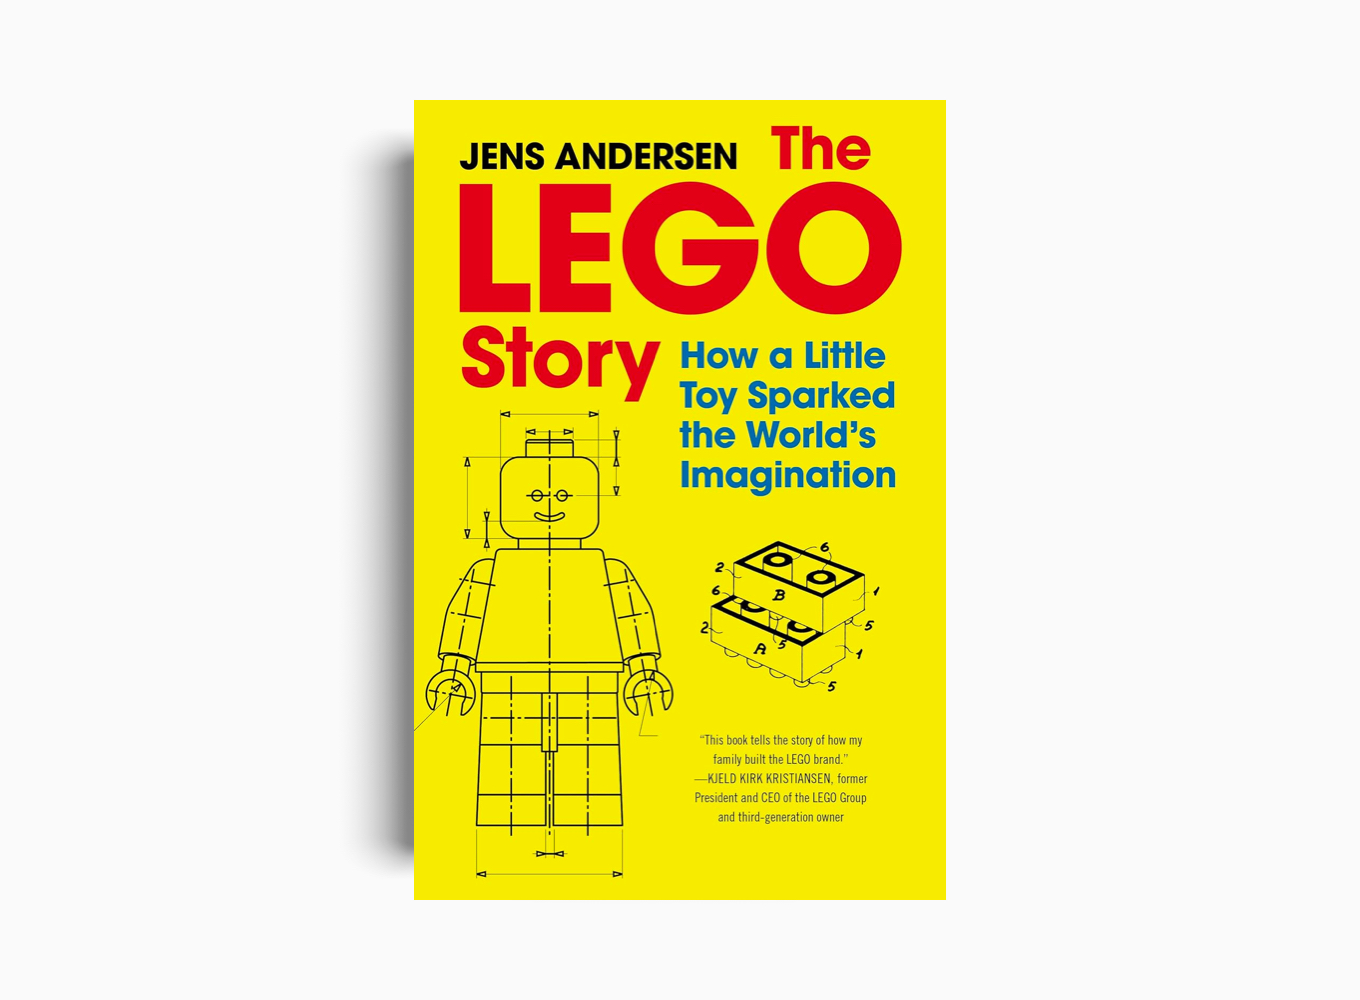 THE LEGO STORY